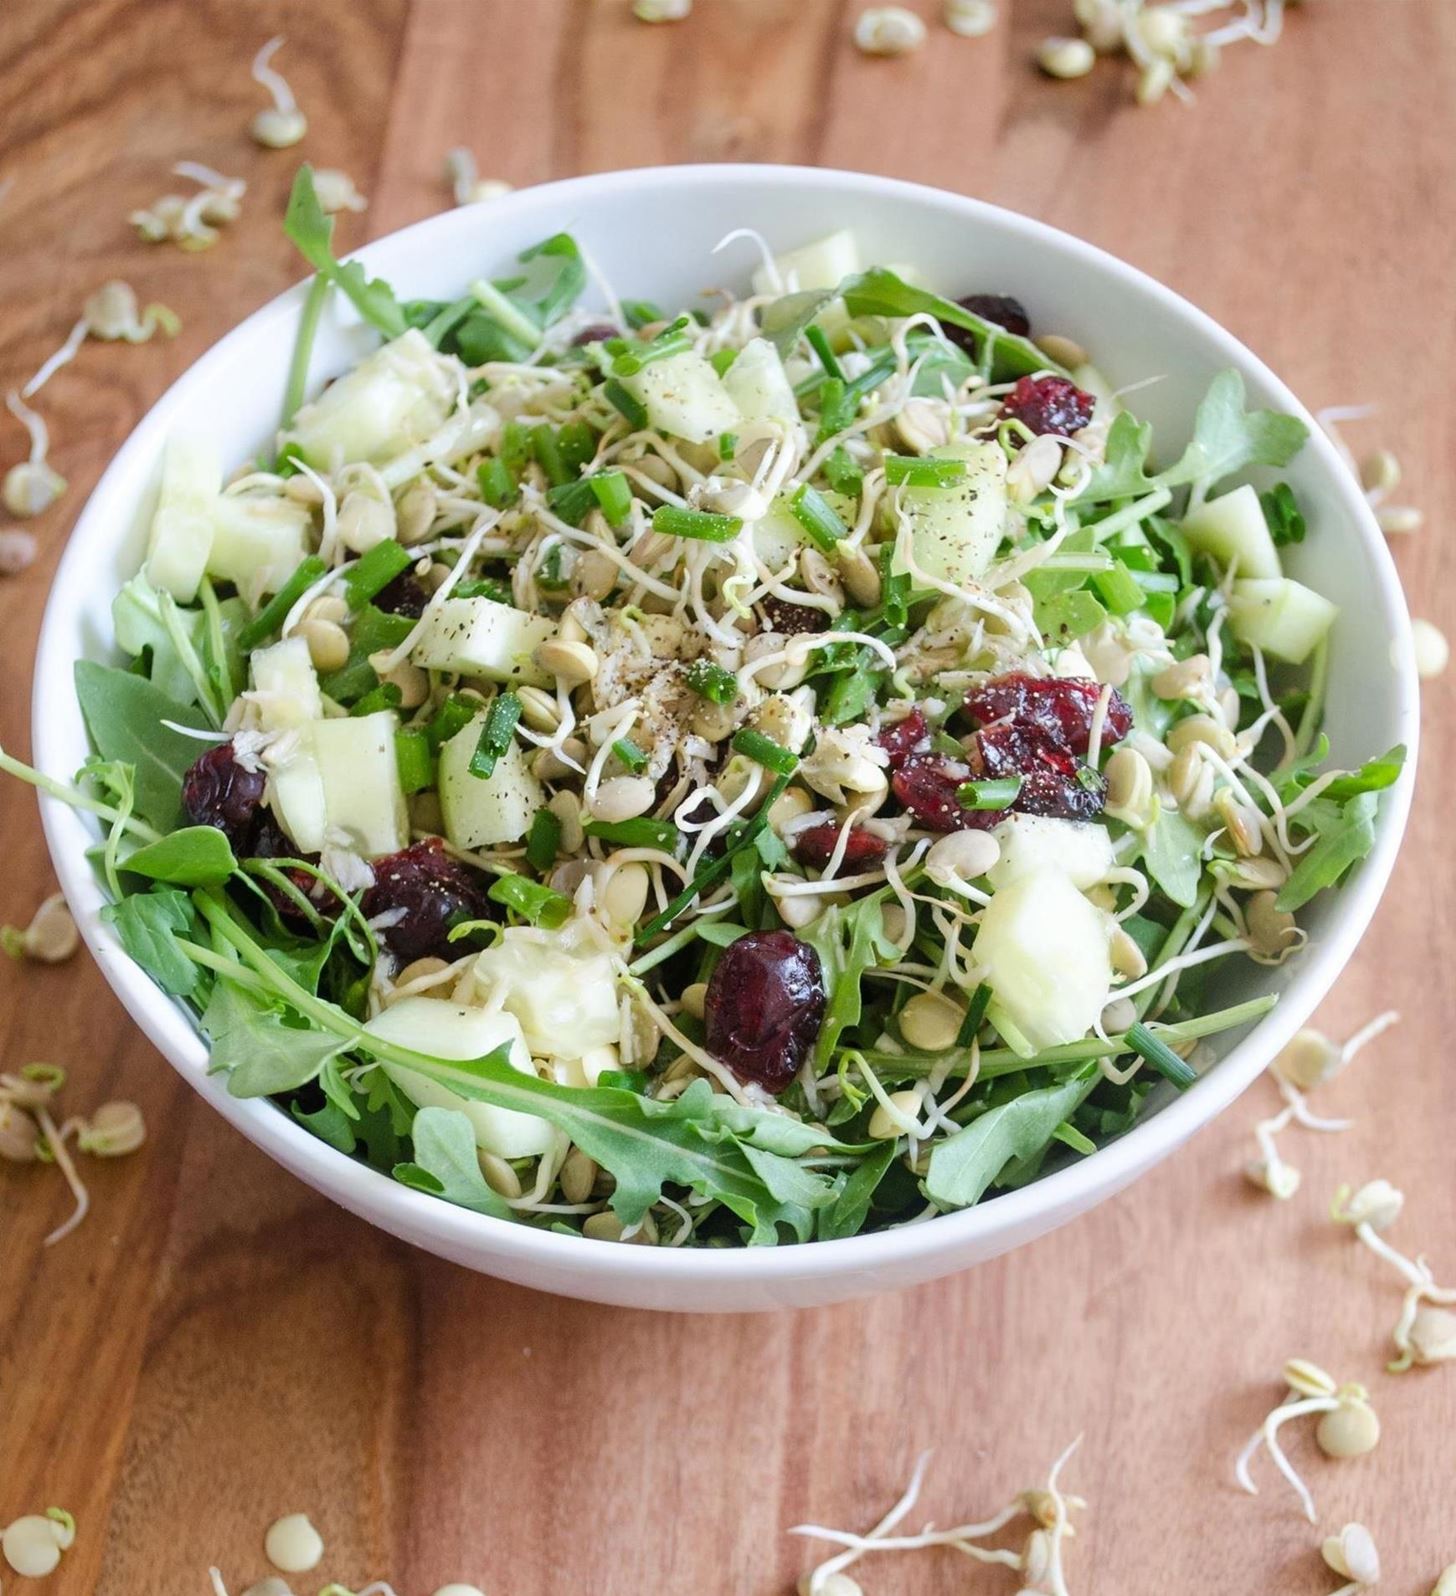 Whoa—You Can Make Sprouts from Lentils, Almonds & More!